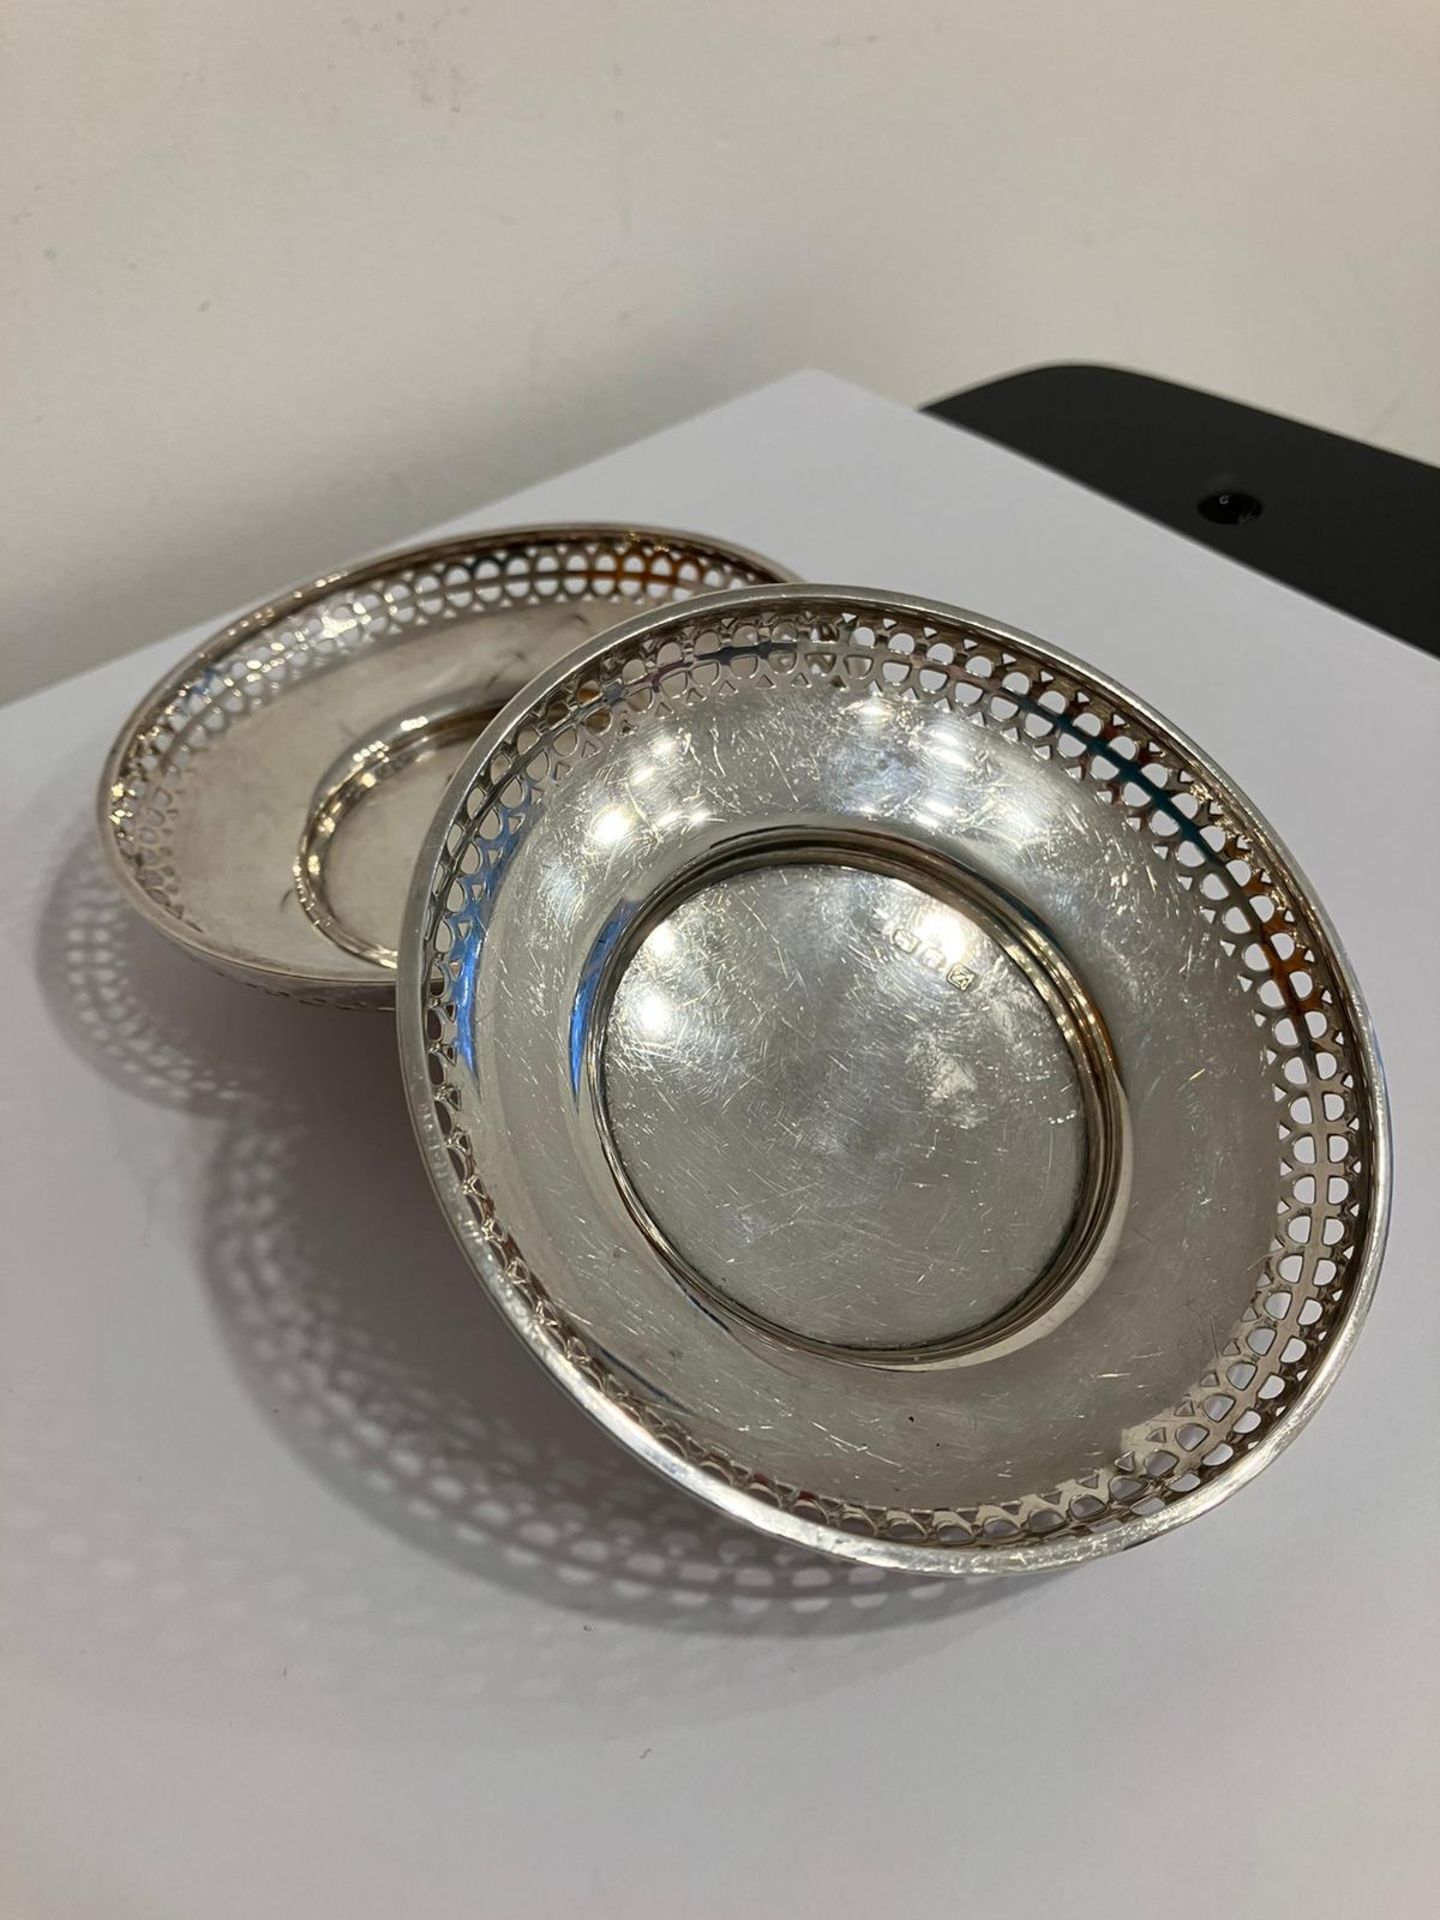 Antique SILVER Pair of BON BON DISHES. Hallmark for A and J Zimmerman, Birmingham 1925. Lovely art